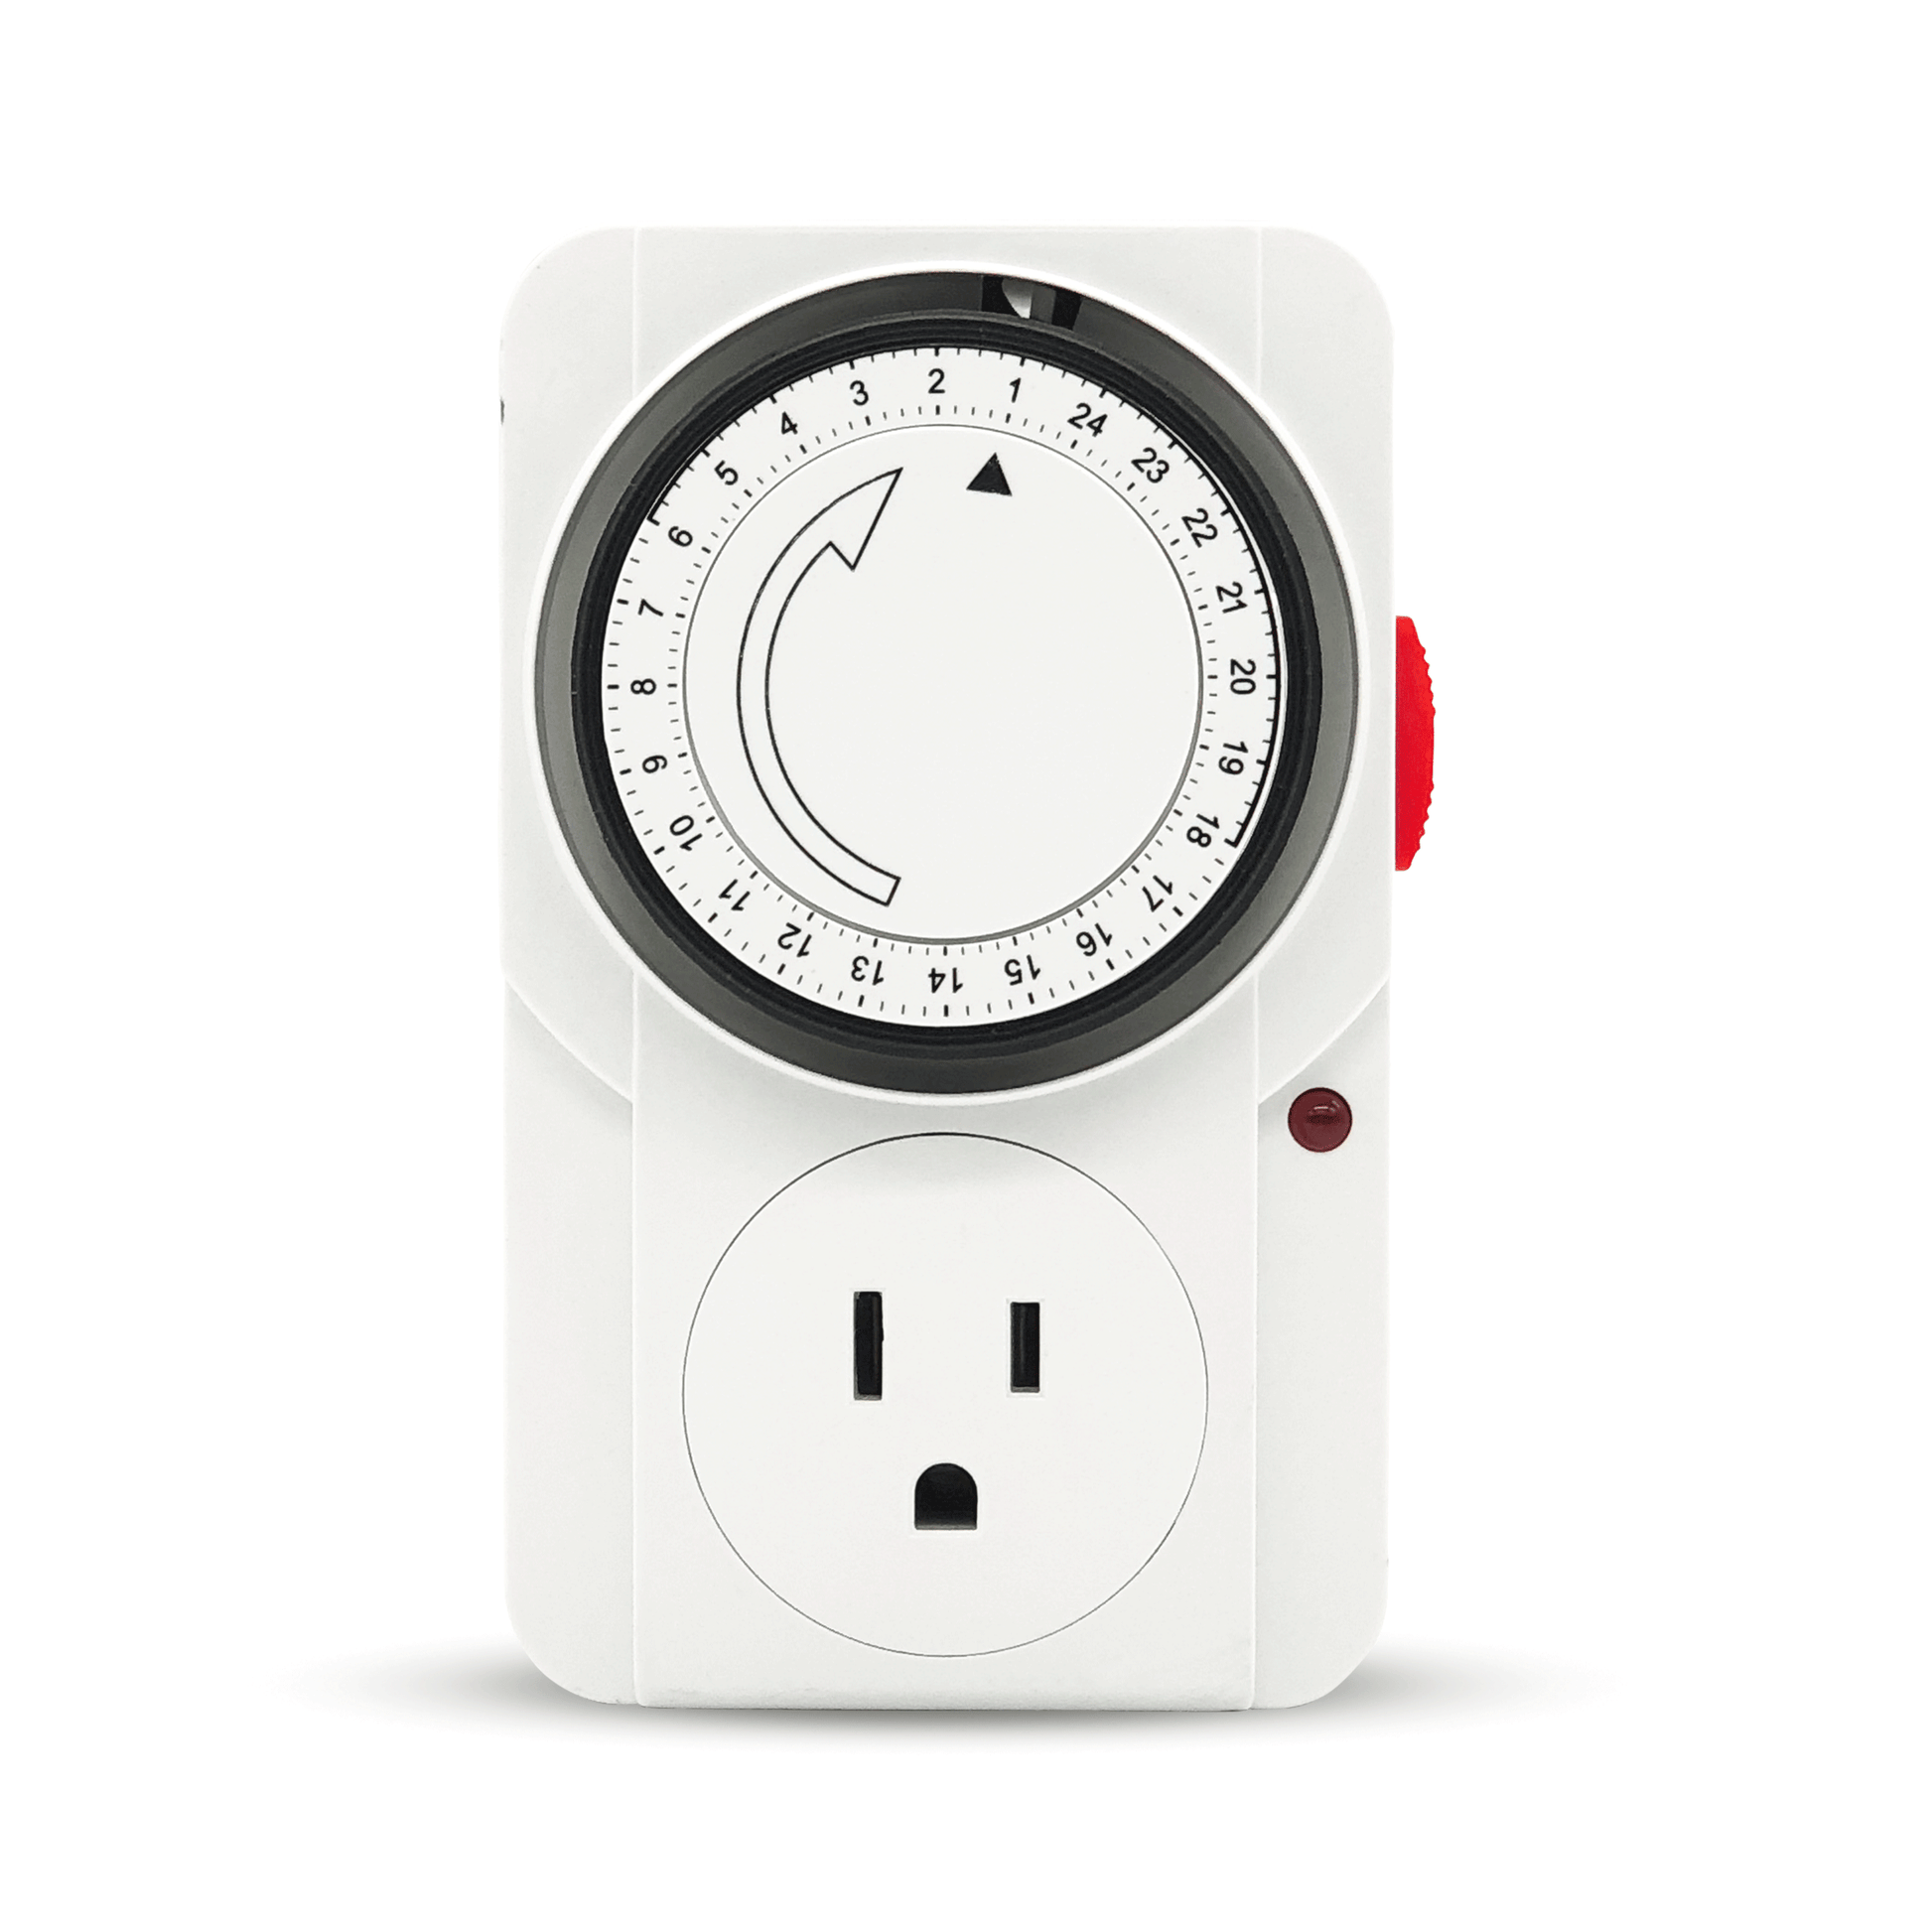 Jiffy Hydro single outlet grounded three-prong timer for grow lights, air pumps and more. Picture is front-facing product: a white timer with dial face showing and three-pronged female outlet is displayed. A bright red Automatic to Manual switch sits to the right.